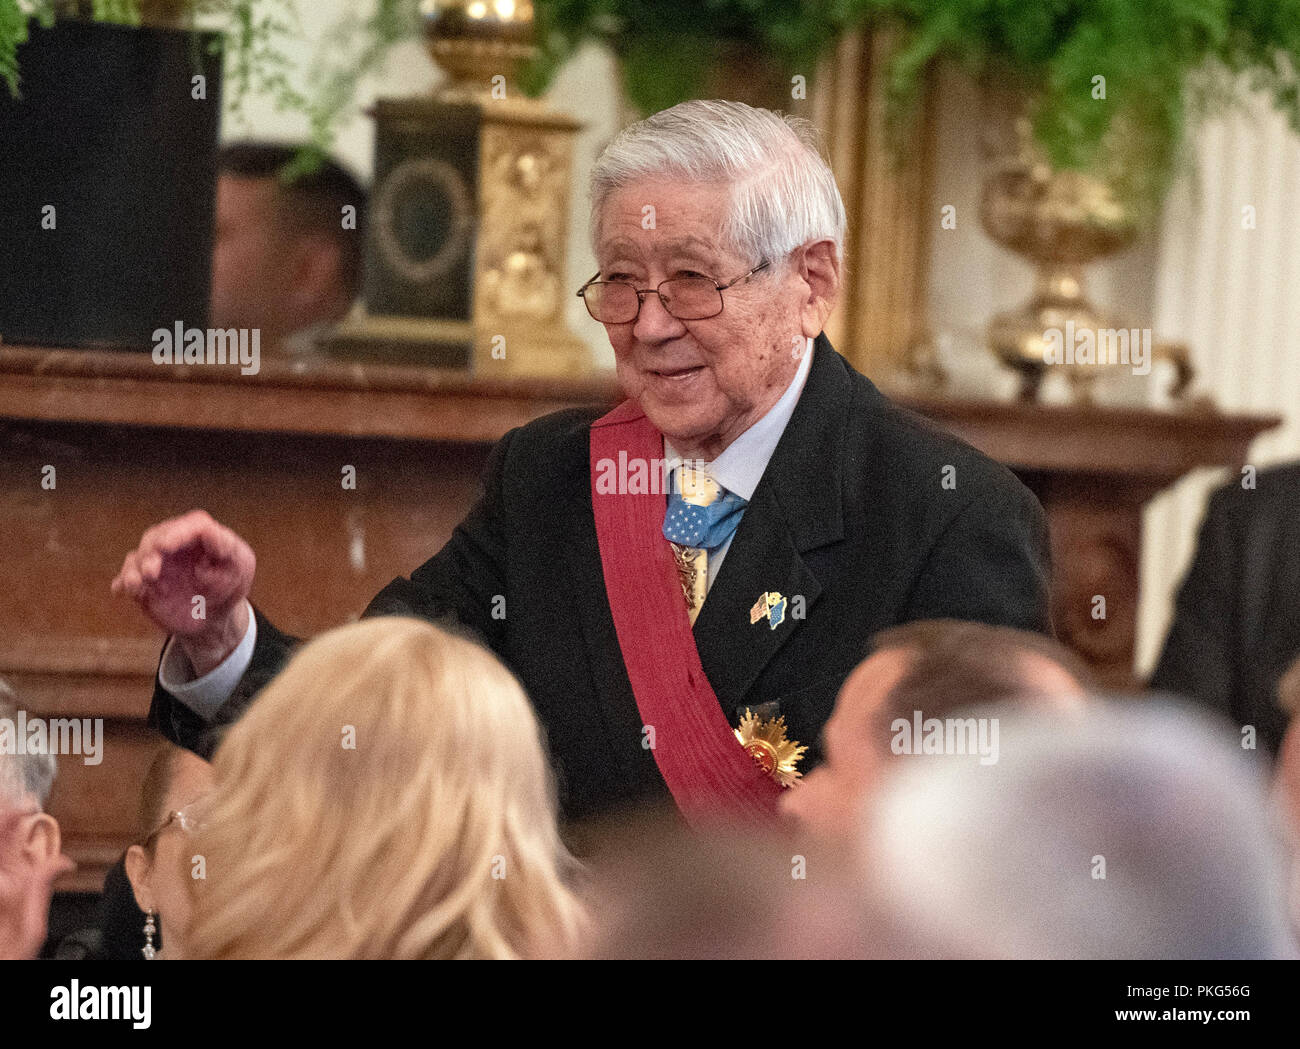 Then-Staff Sergeant Hiroshi Miyamura, United States Army, a Medal of Honor recipient for bravery in the Korean War, stands after being introduced by US President Donald J. Trump as he makes remarks at the Congressional Medal of Honor Society Reception in the East Room of the White House in Washington, DC on Wednesday, September 12, 2018. Credit: Ron Sachs/CNP /MediaPunch Stock Photo